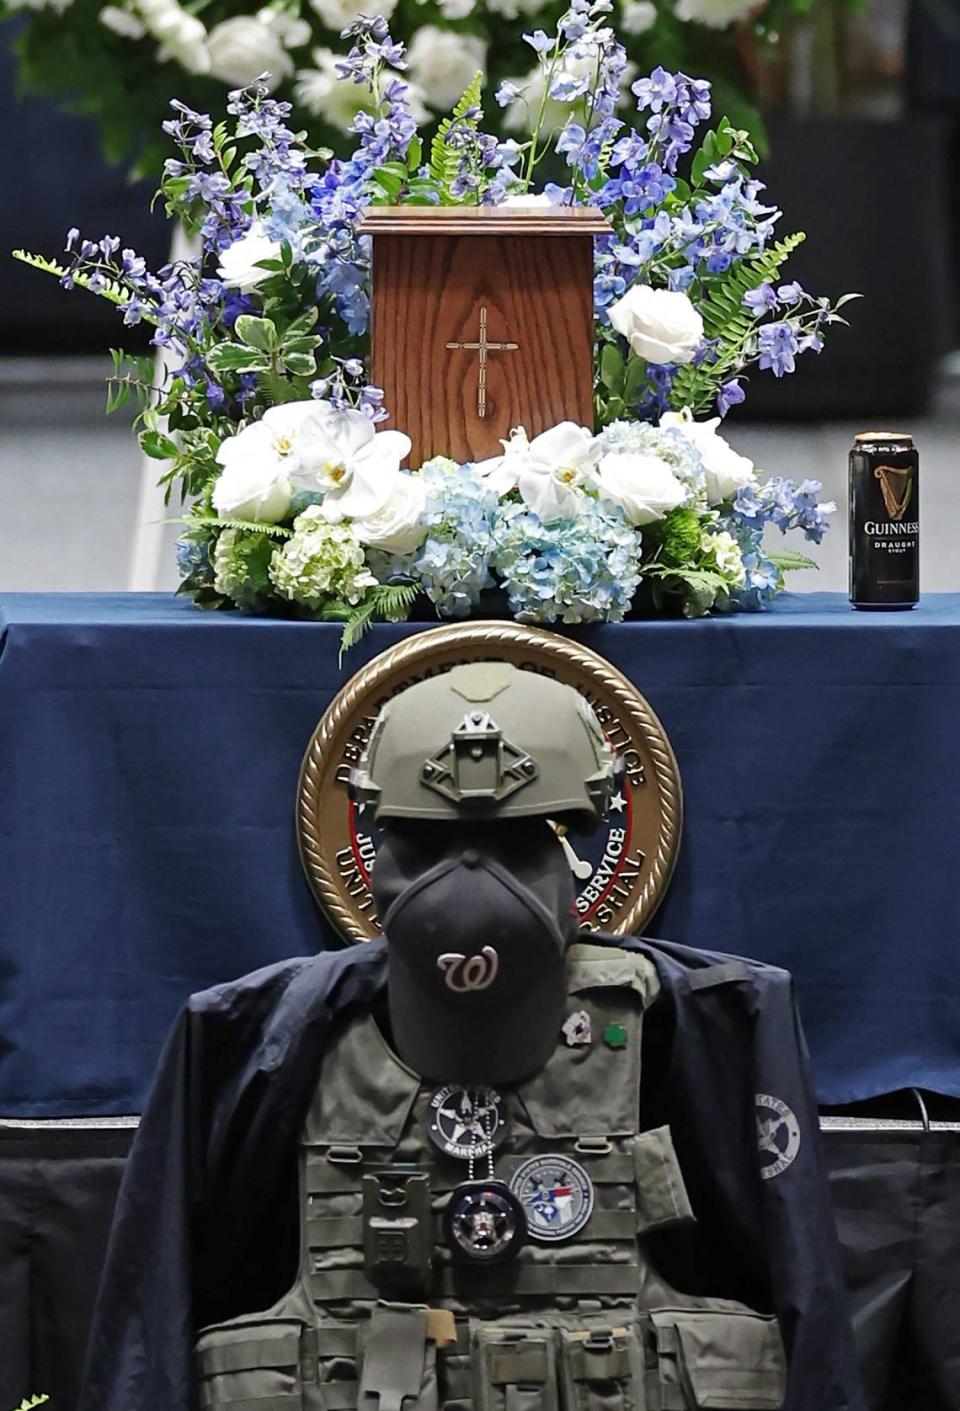 U.S. Deputy Marshal Thomas Weeks Jr.’s, gear and remains stand during a memorial to the slain officer at Bojangles Coliseum in Charlotte, NC on Monday, May 6, 2024. Weeks died during a standoff with a gunman on Monday, April 29th 2024. Two other law enforcement officers were also killed in the shootout. CMPD Officer Joshua Eyer passed away later Monday evening from injuries sustained during the shootout.